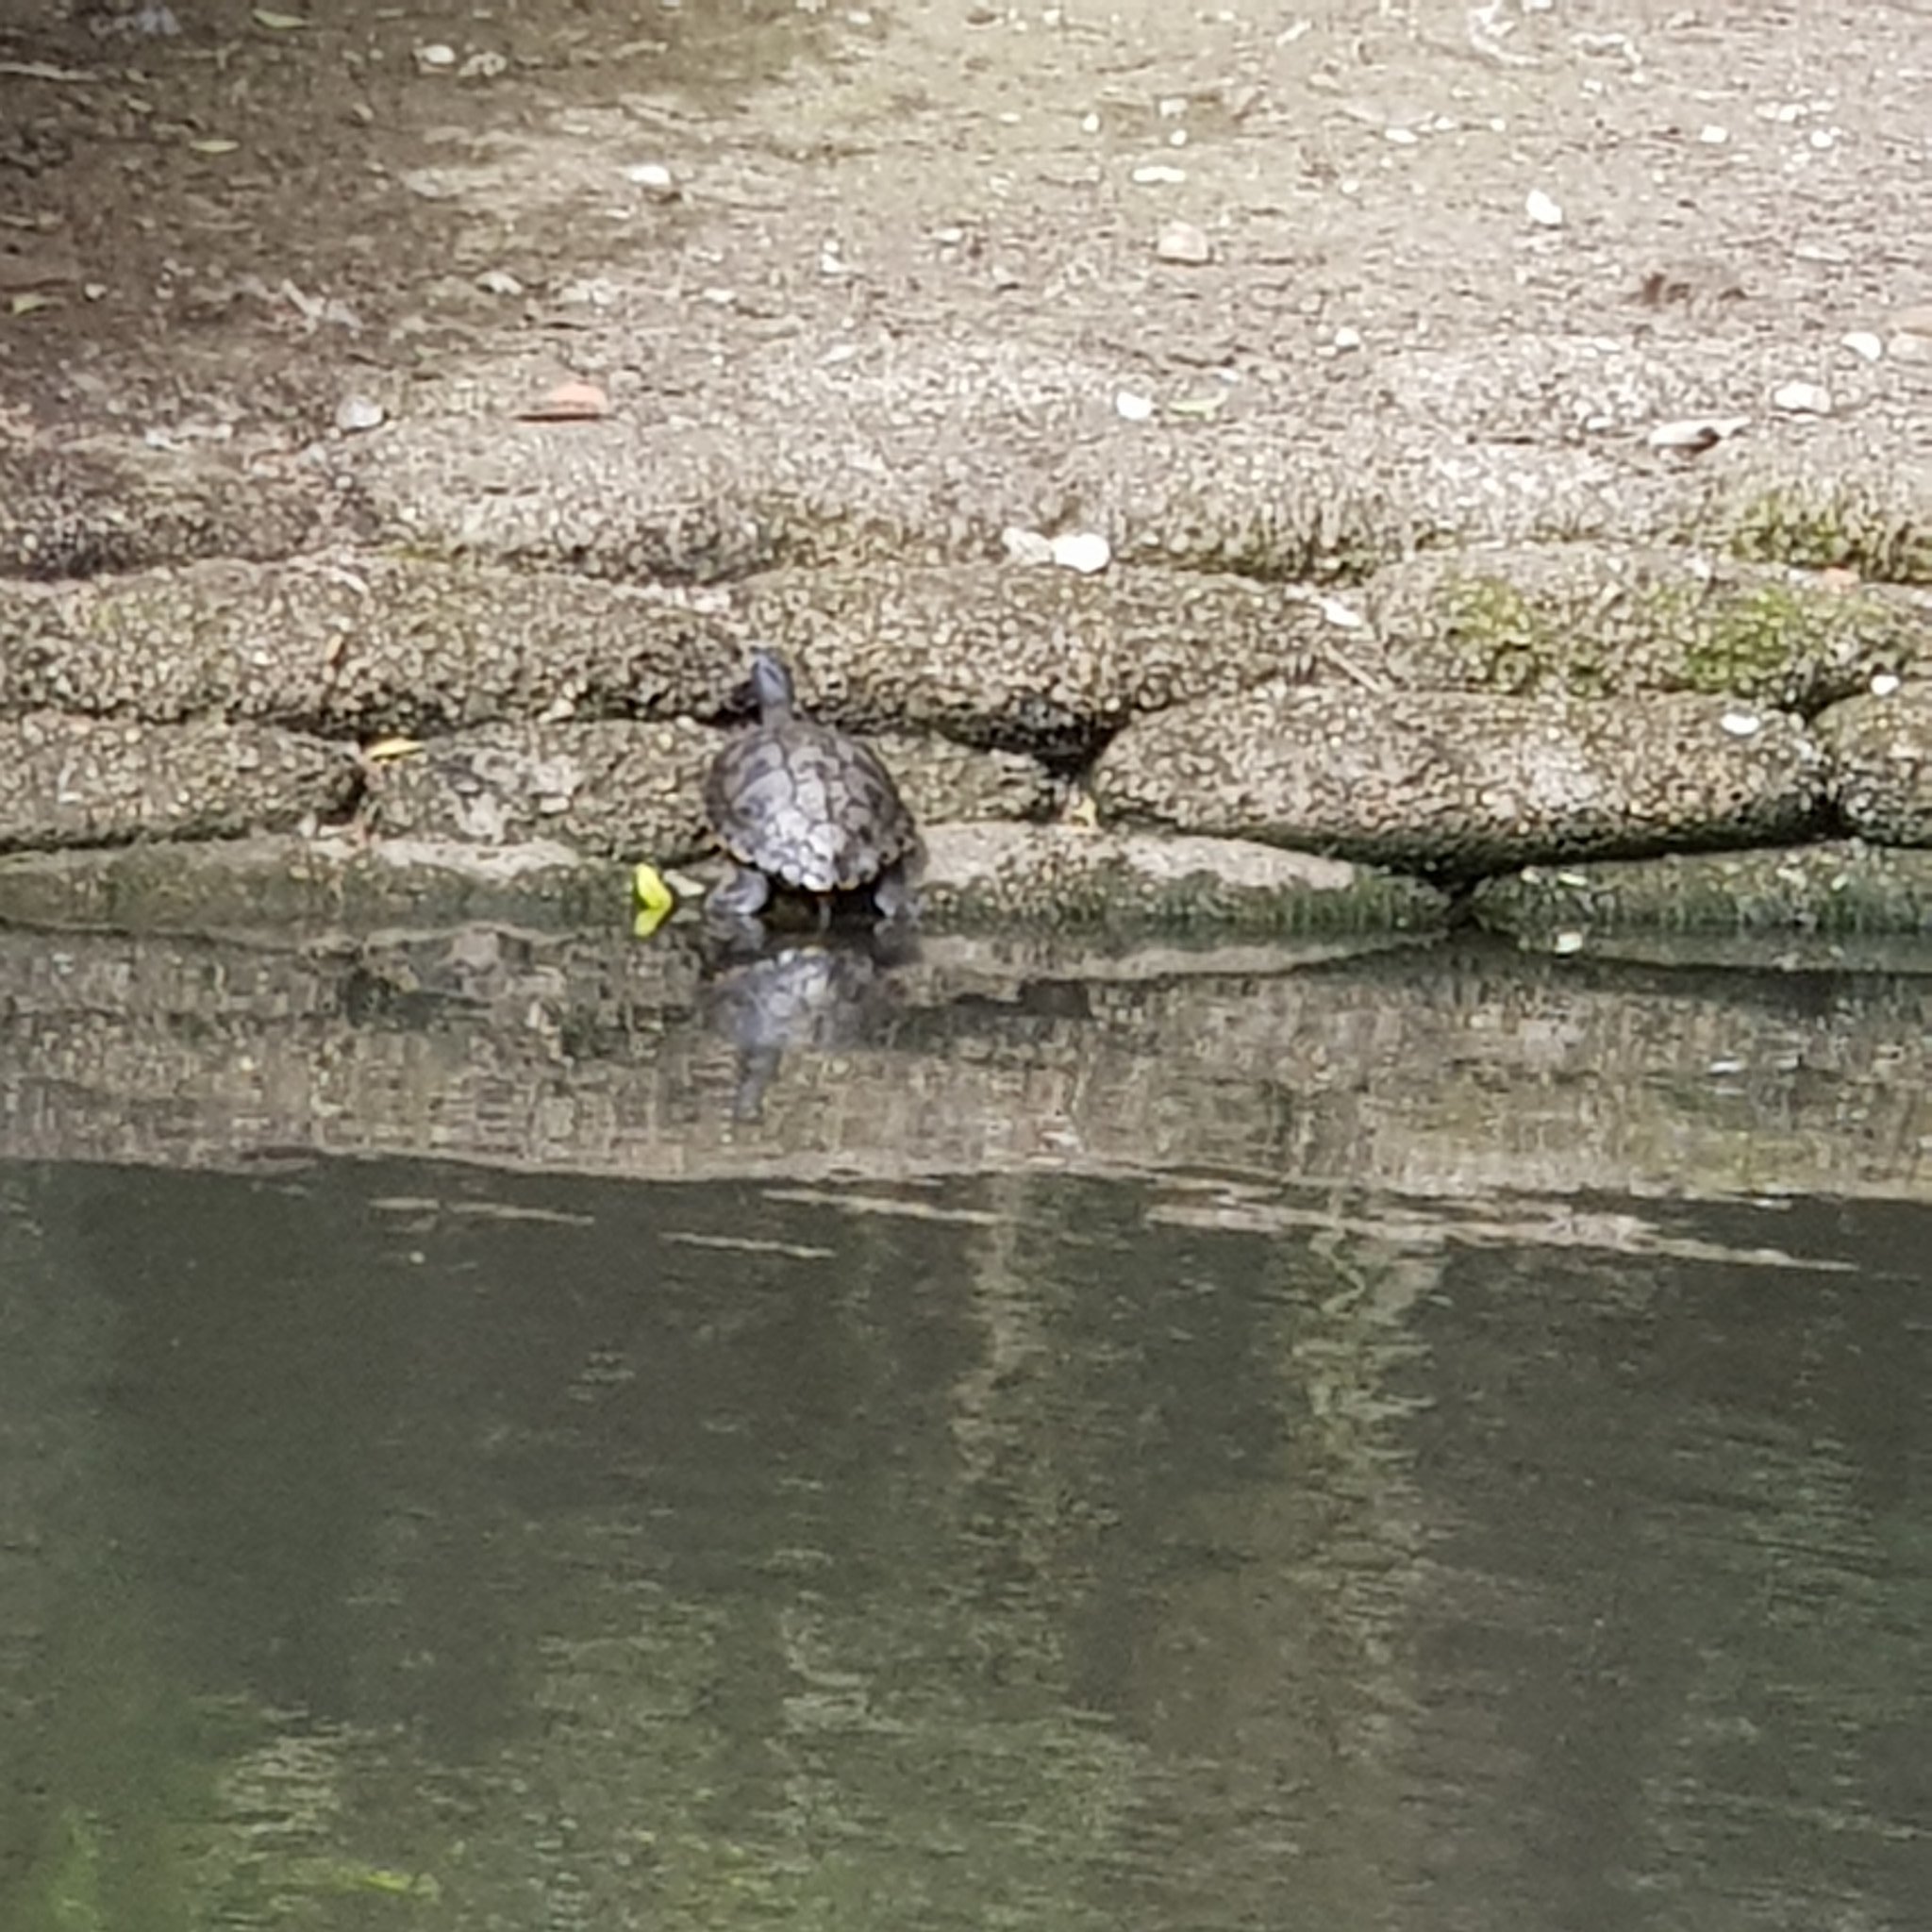 Brighton and Hove Police recovered a terrapin from the pond in Queens Park